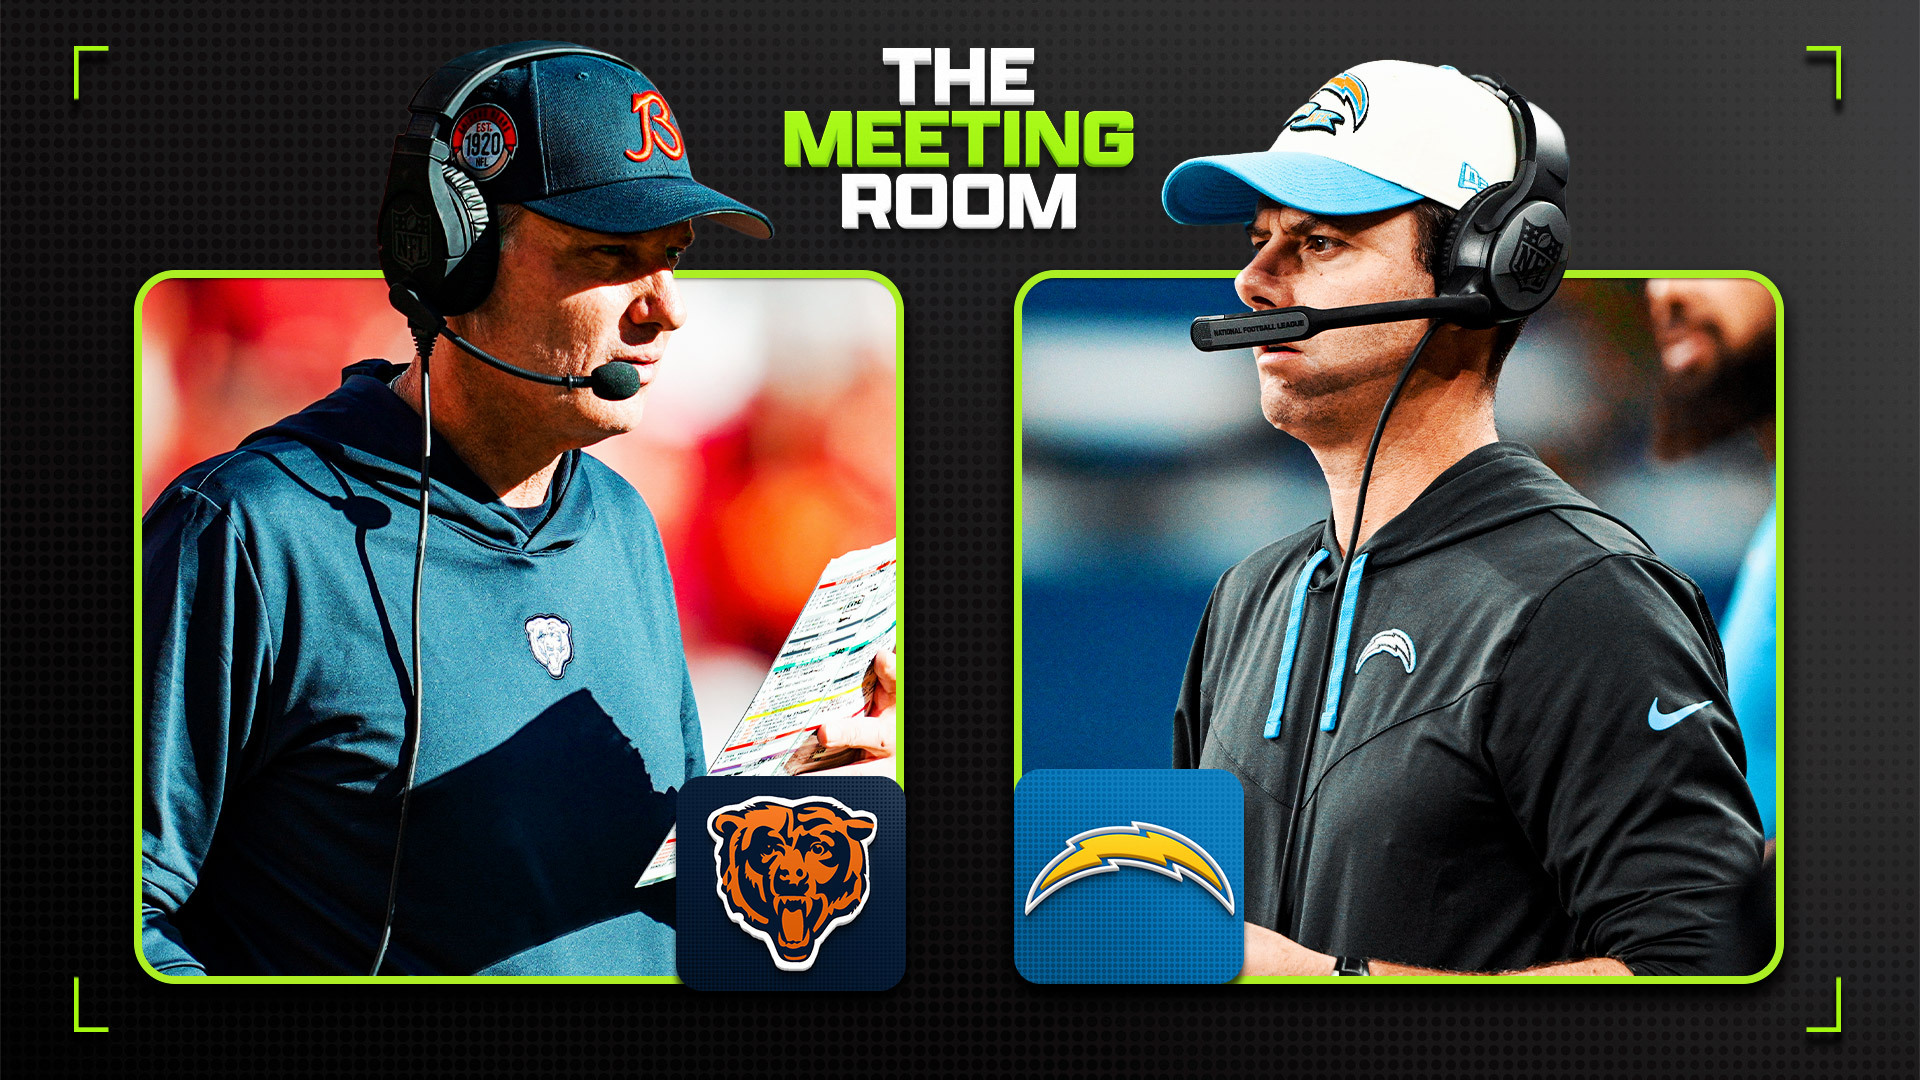 graphic with text that reads "The Meeting Room" with images of Matt Eberflus on the left and Brandon Staley on the right